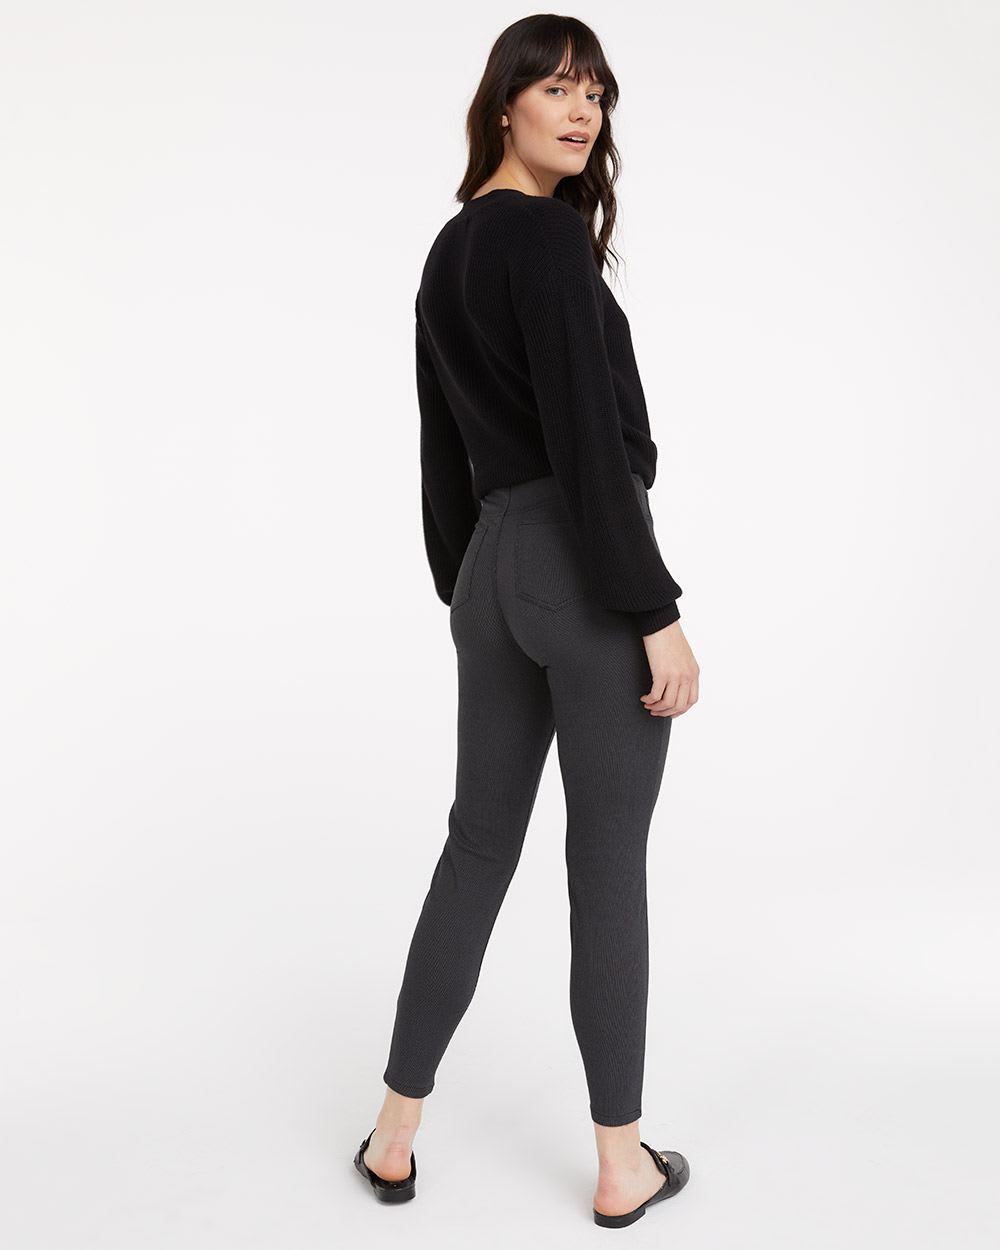 Textured Legging with Pockets, The Iconic - Petite, Petite